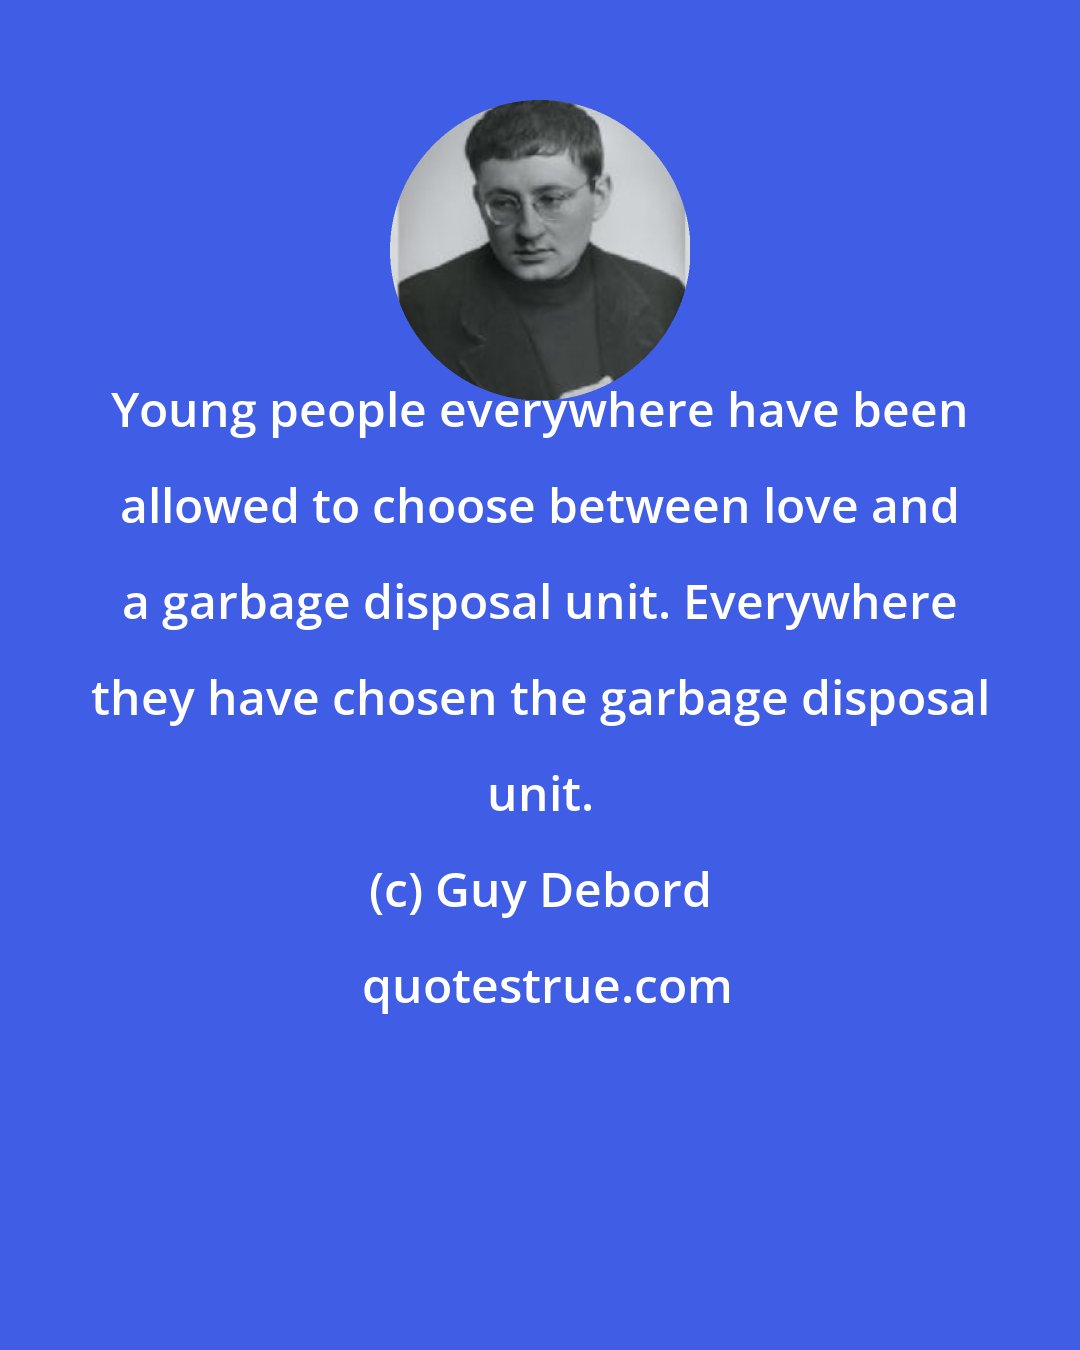 Guy Debord: Young people everywhere have been allowed to choose between love and a garbage disposal unit. Everywhere they have chosen the garbage disposal unit.